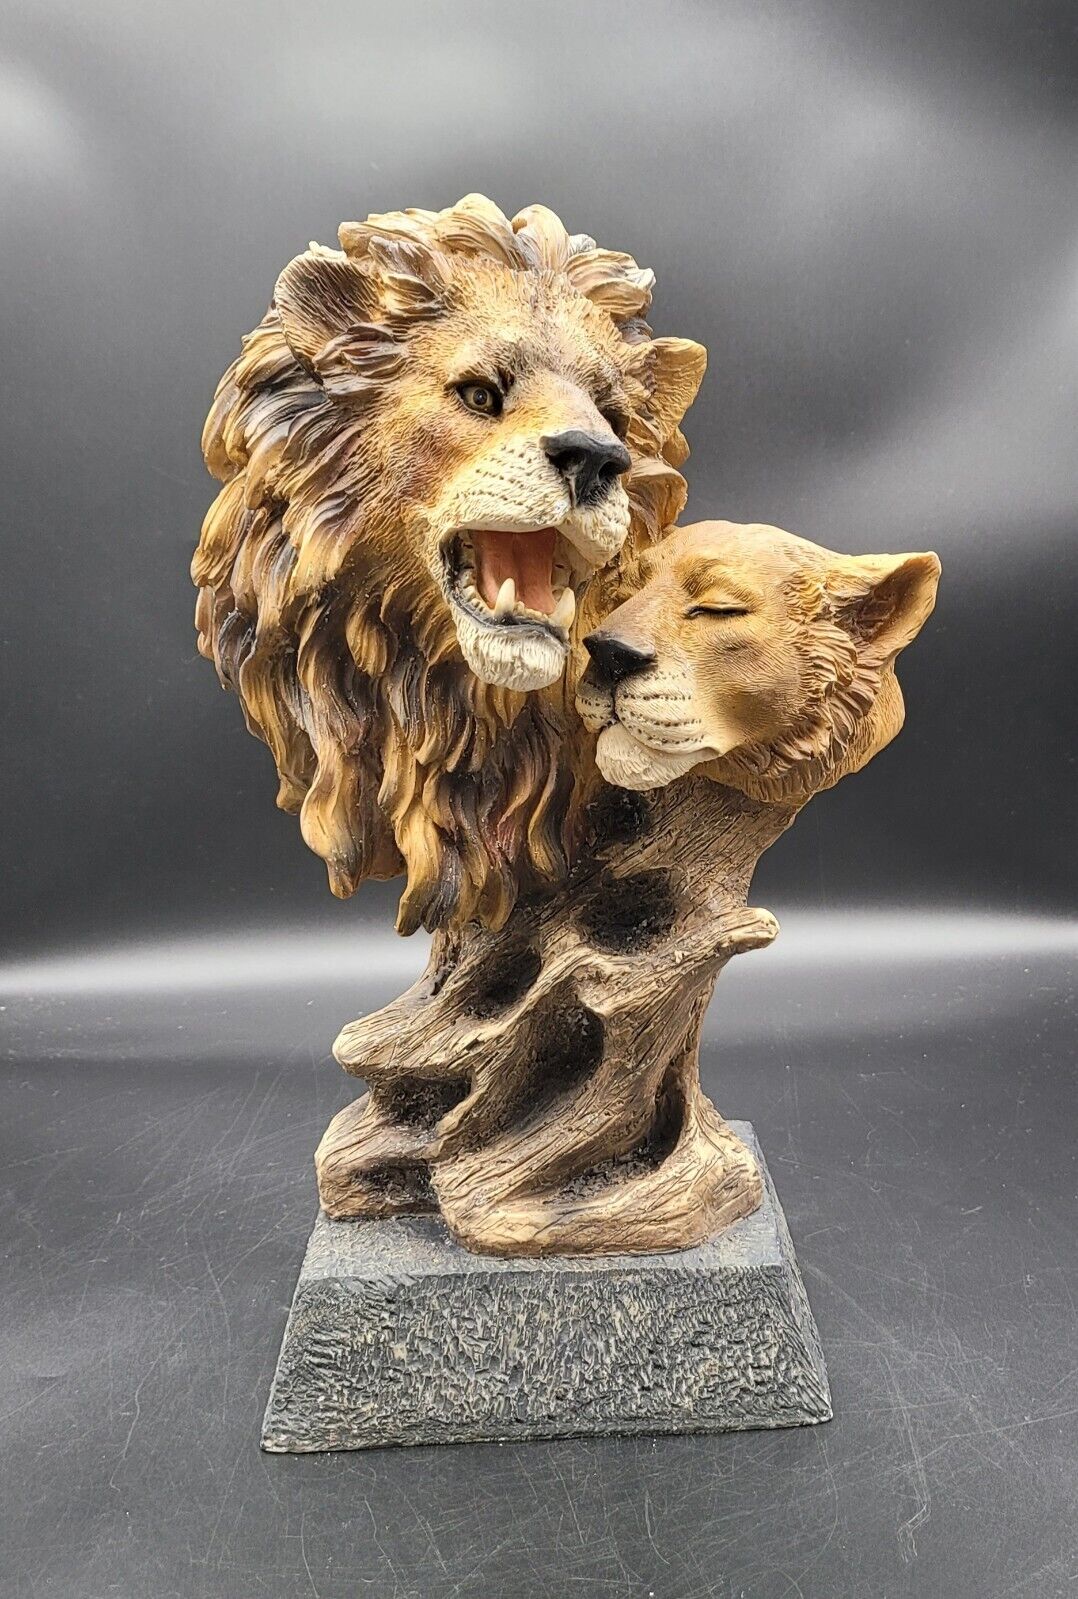 Lion And Lioness 13in Tall Polyresin Statue By DWK 2002